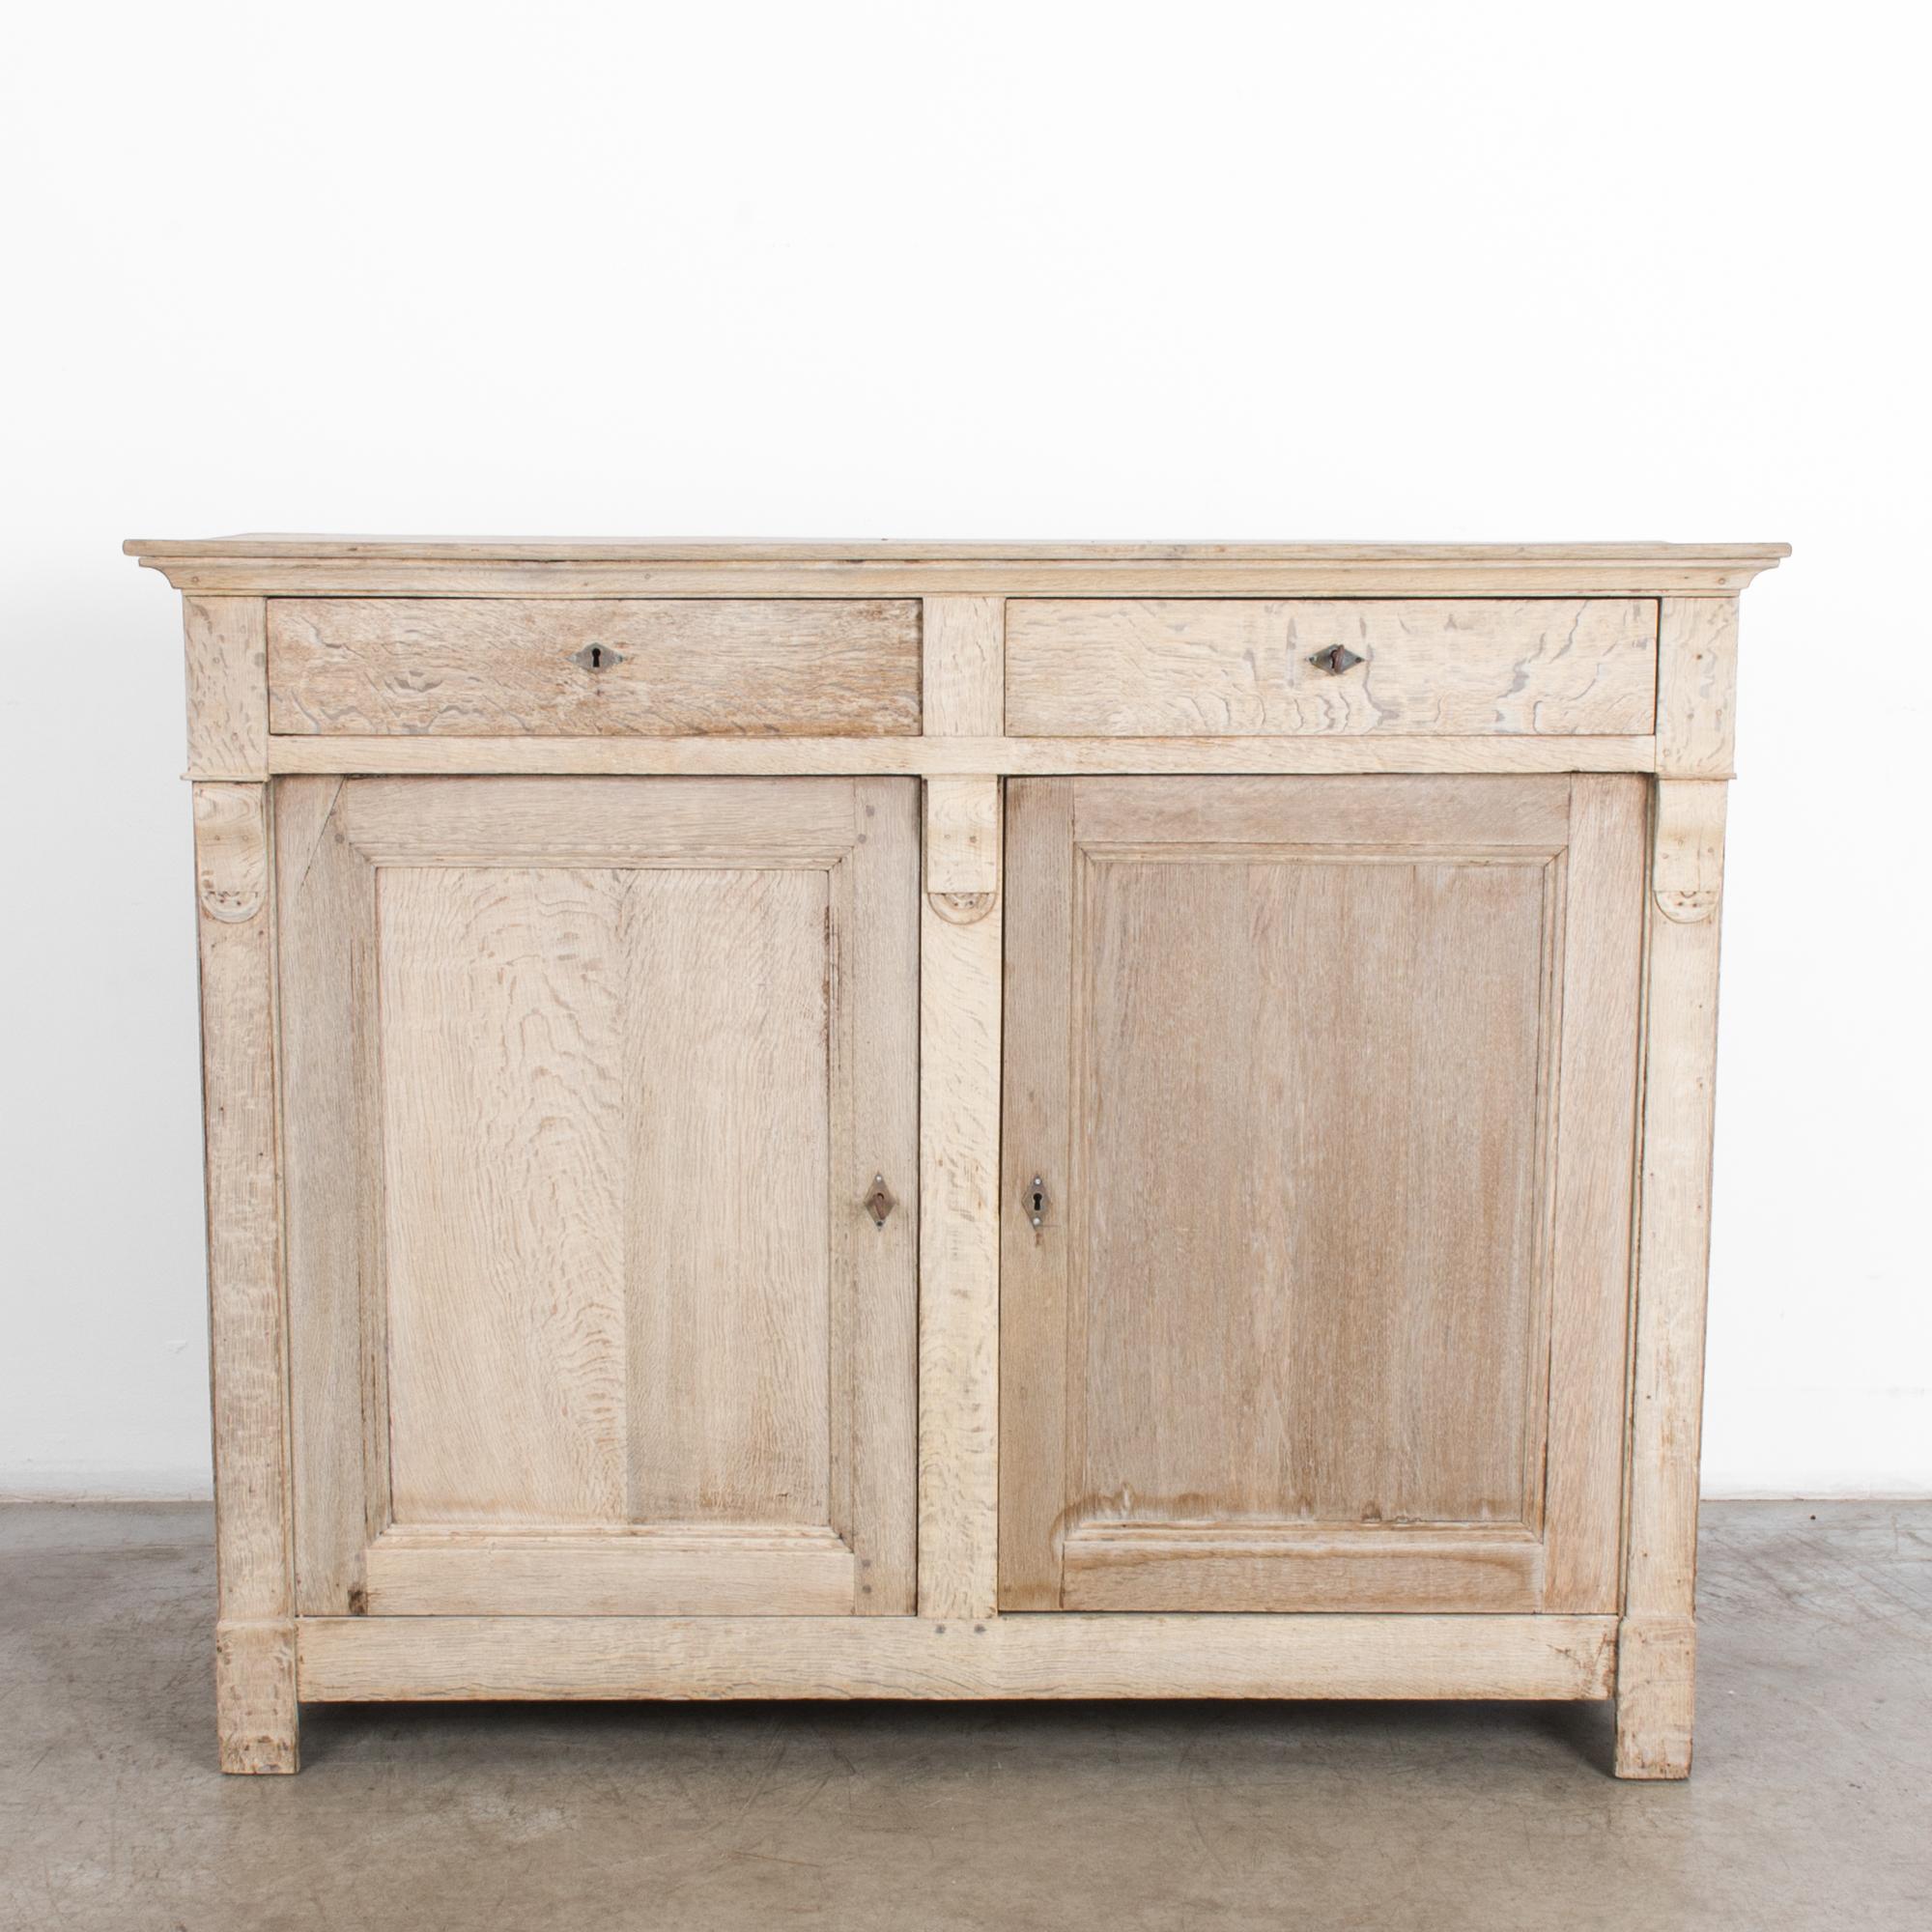 Made in Belgium in the 1880s, this oak buffet features two doors and two drawers. A simple shape and natural finish recall the spartan interior of the country home, with a subtle elegance. The Charles X silhouette nods to formal fashion. Restored in